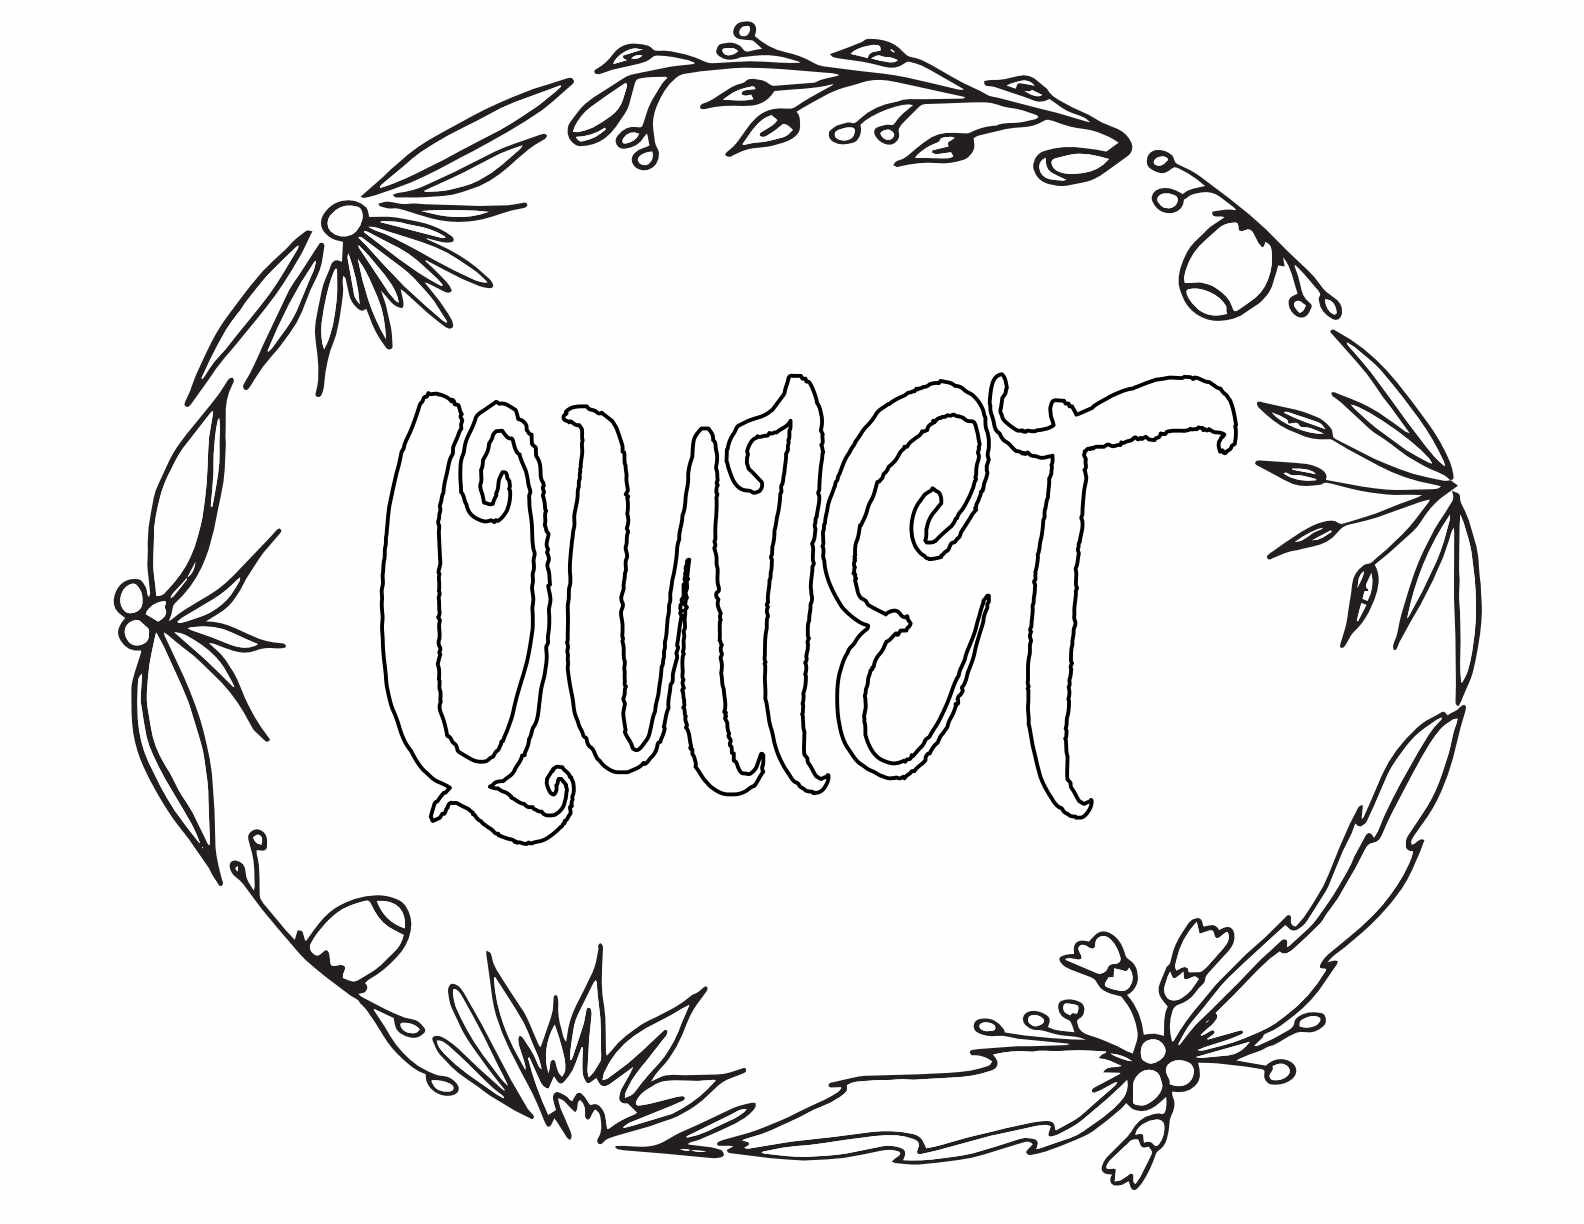 3 Free QUIET Printable Coloring Page CLICK HERE TO DOWNLOAD THE PAGE ABOVE